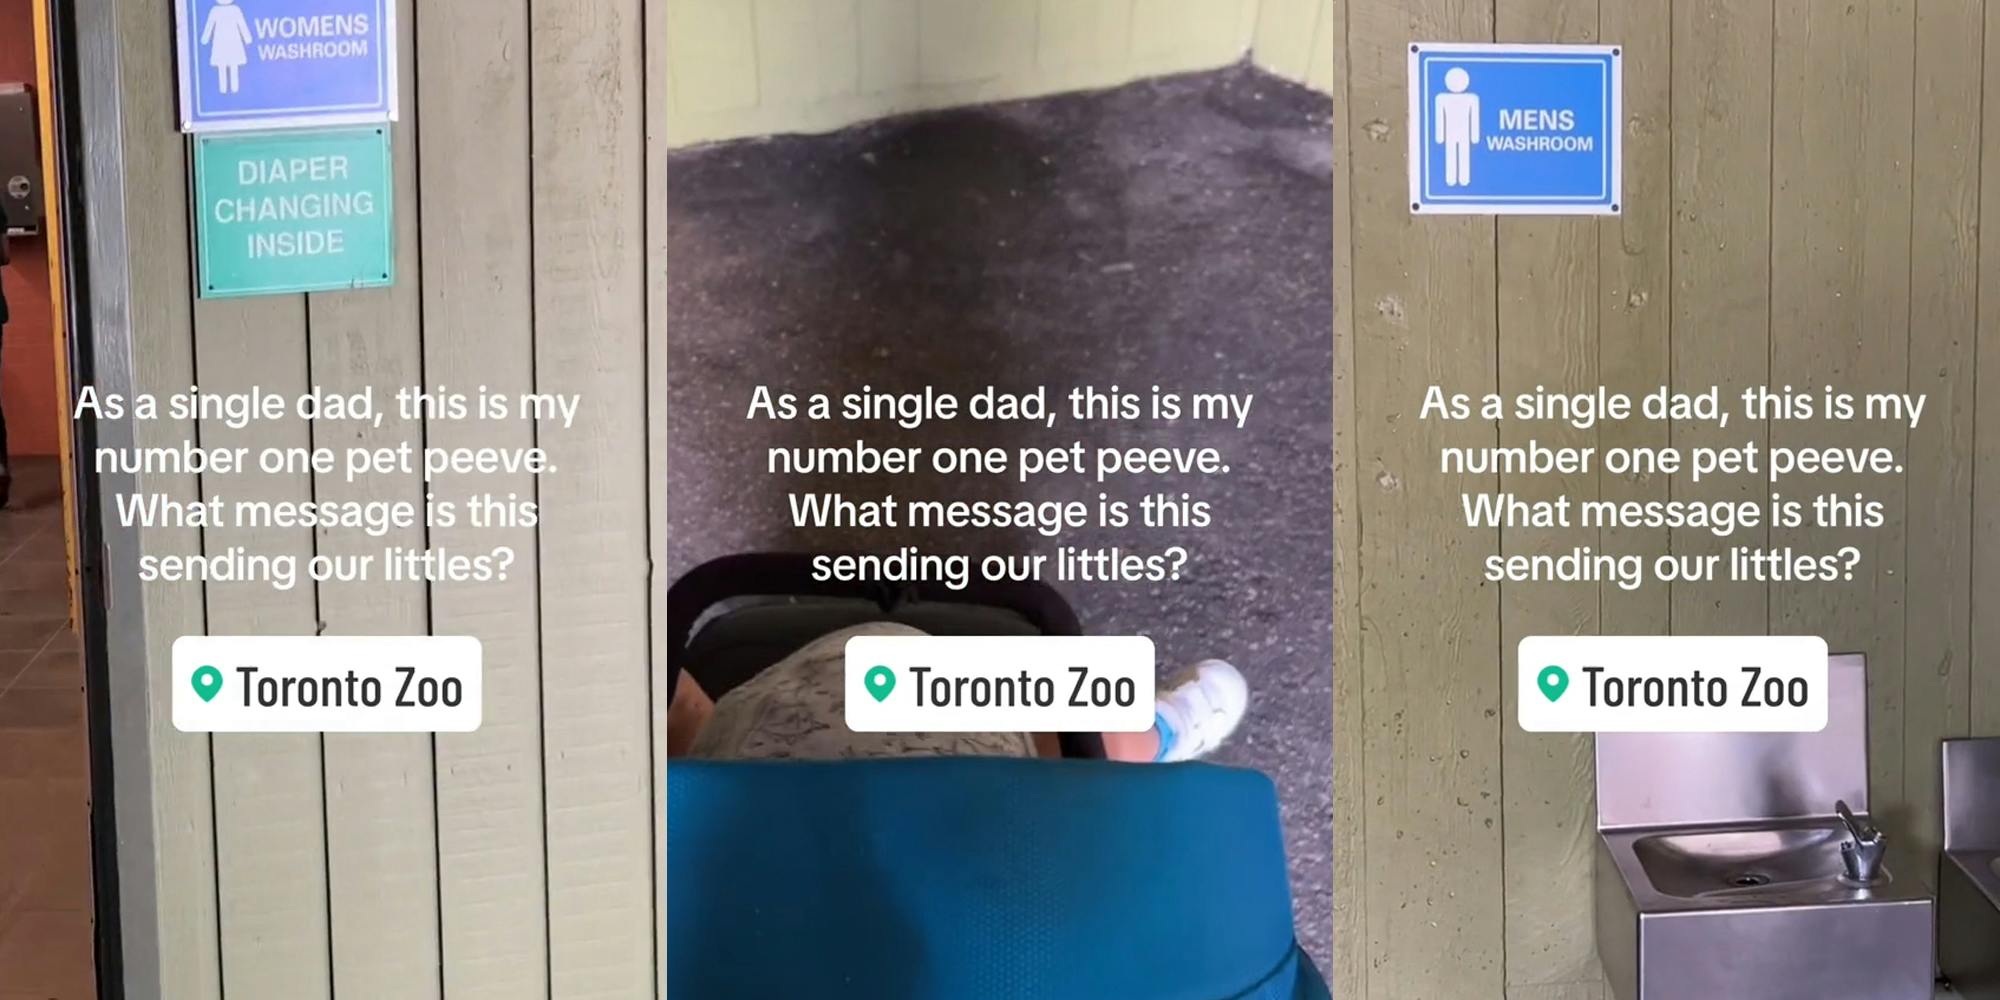 Toronto Zoo bathroom with signs "WOMENS WASHROOM DIAPER CHANGING INSIDE" with caption "As a single dad, this is my number one pet peeve. What message is this sending our littles?" (l) baby in stroller with caption "As a single dad, this is my number one pet peeve. What message is this sending our littles?" (c) Toronto Zoo sign "MENS BATHROOM" with caption "As a single dad, this is my number one pet peeve. What message is this sending our littles?" (r)